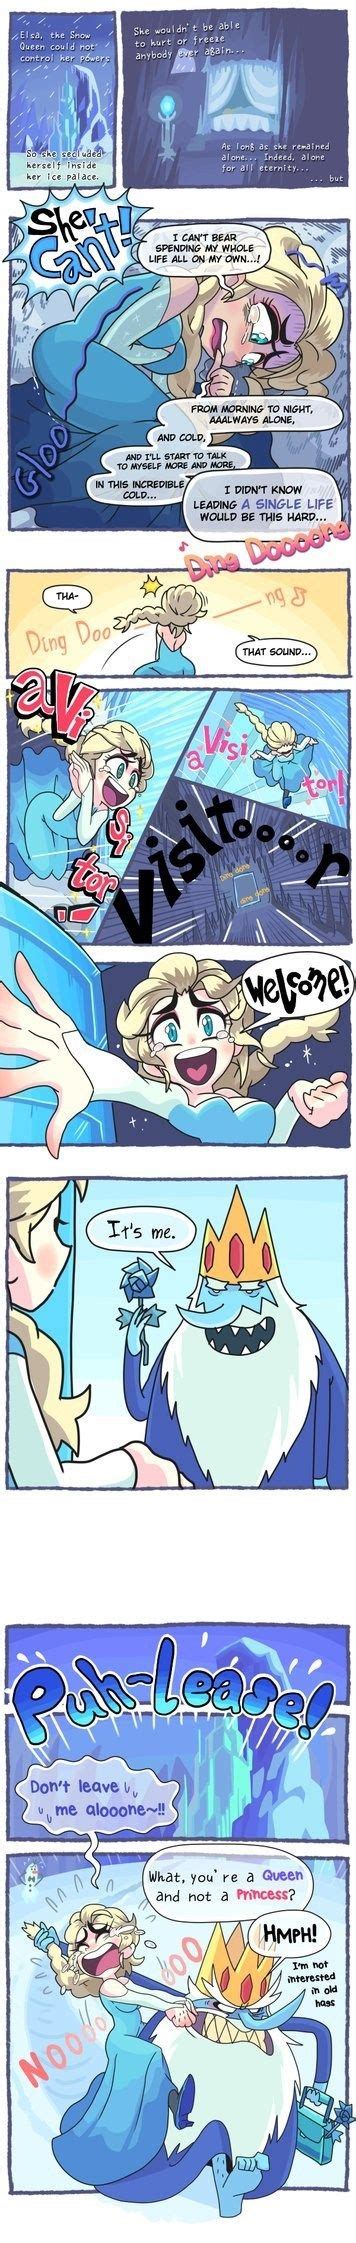 Elsa And The Ice King Frozen Comics Adventure Time